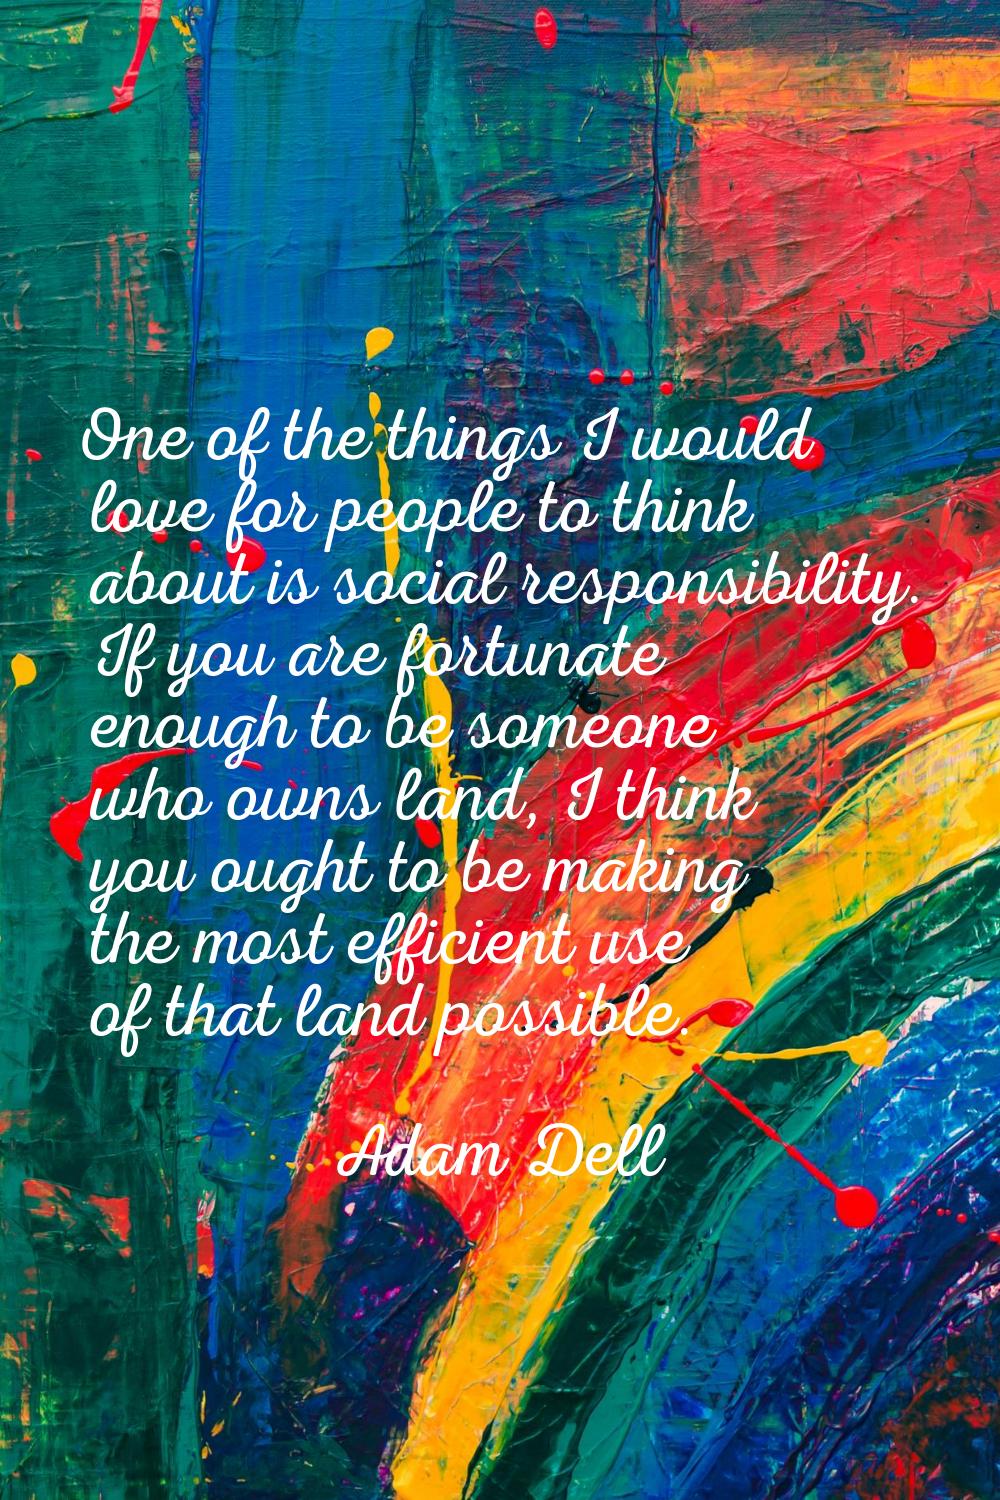 One of the things I would love for people to think about is social responsibility. If you are fortu